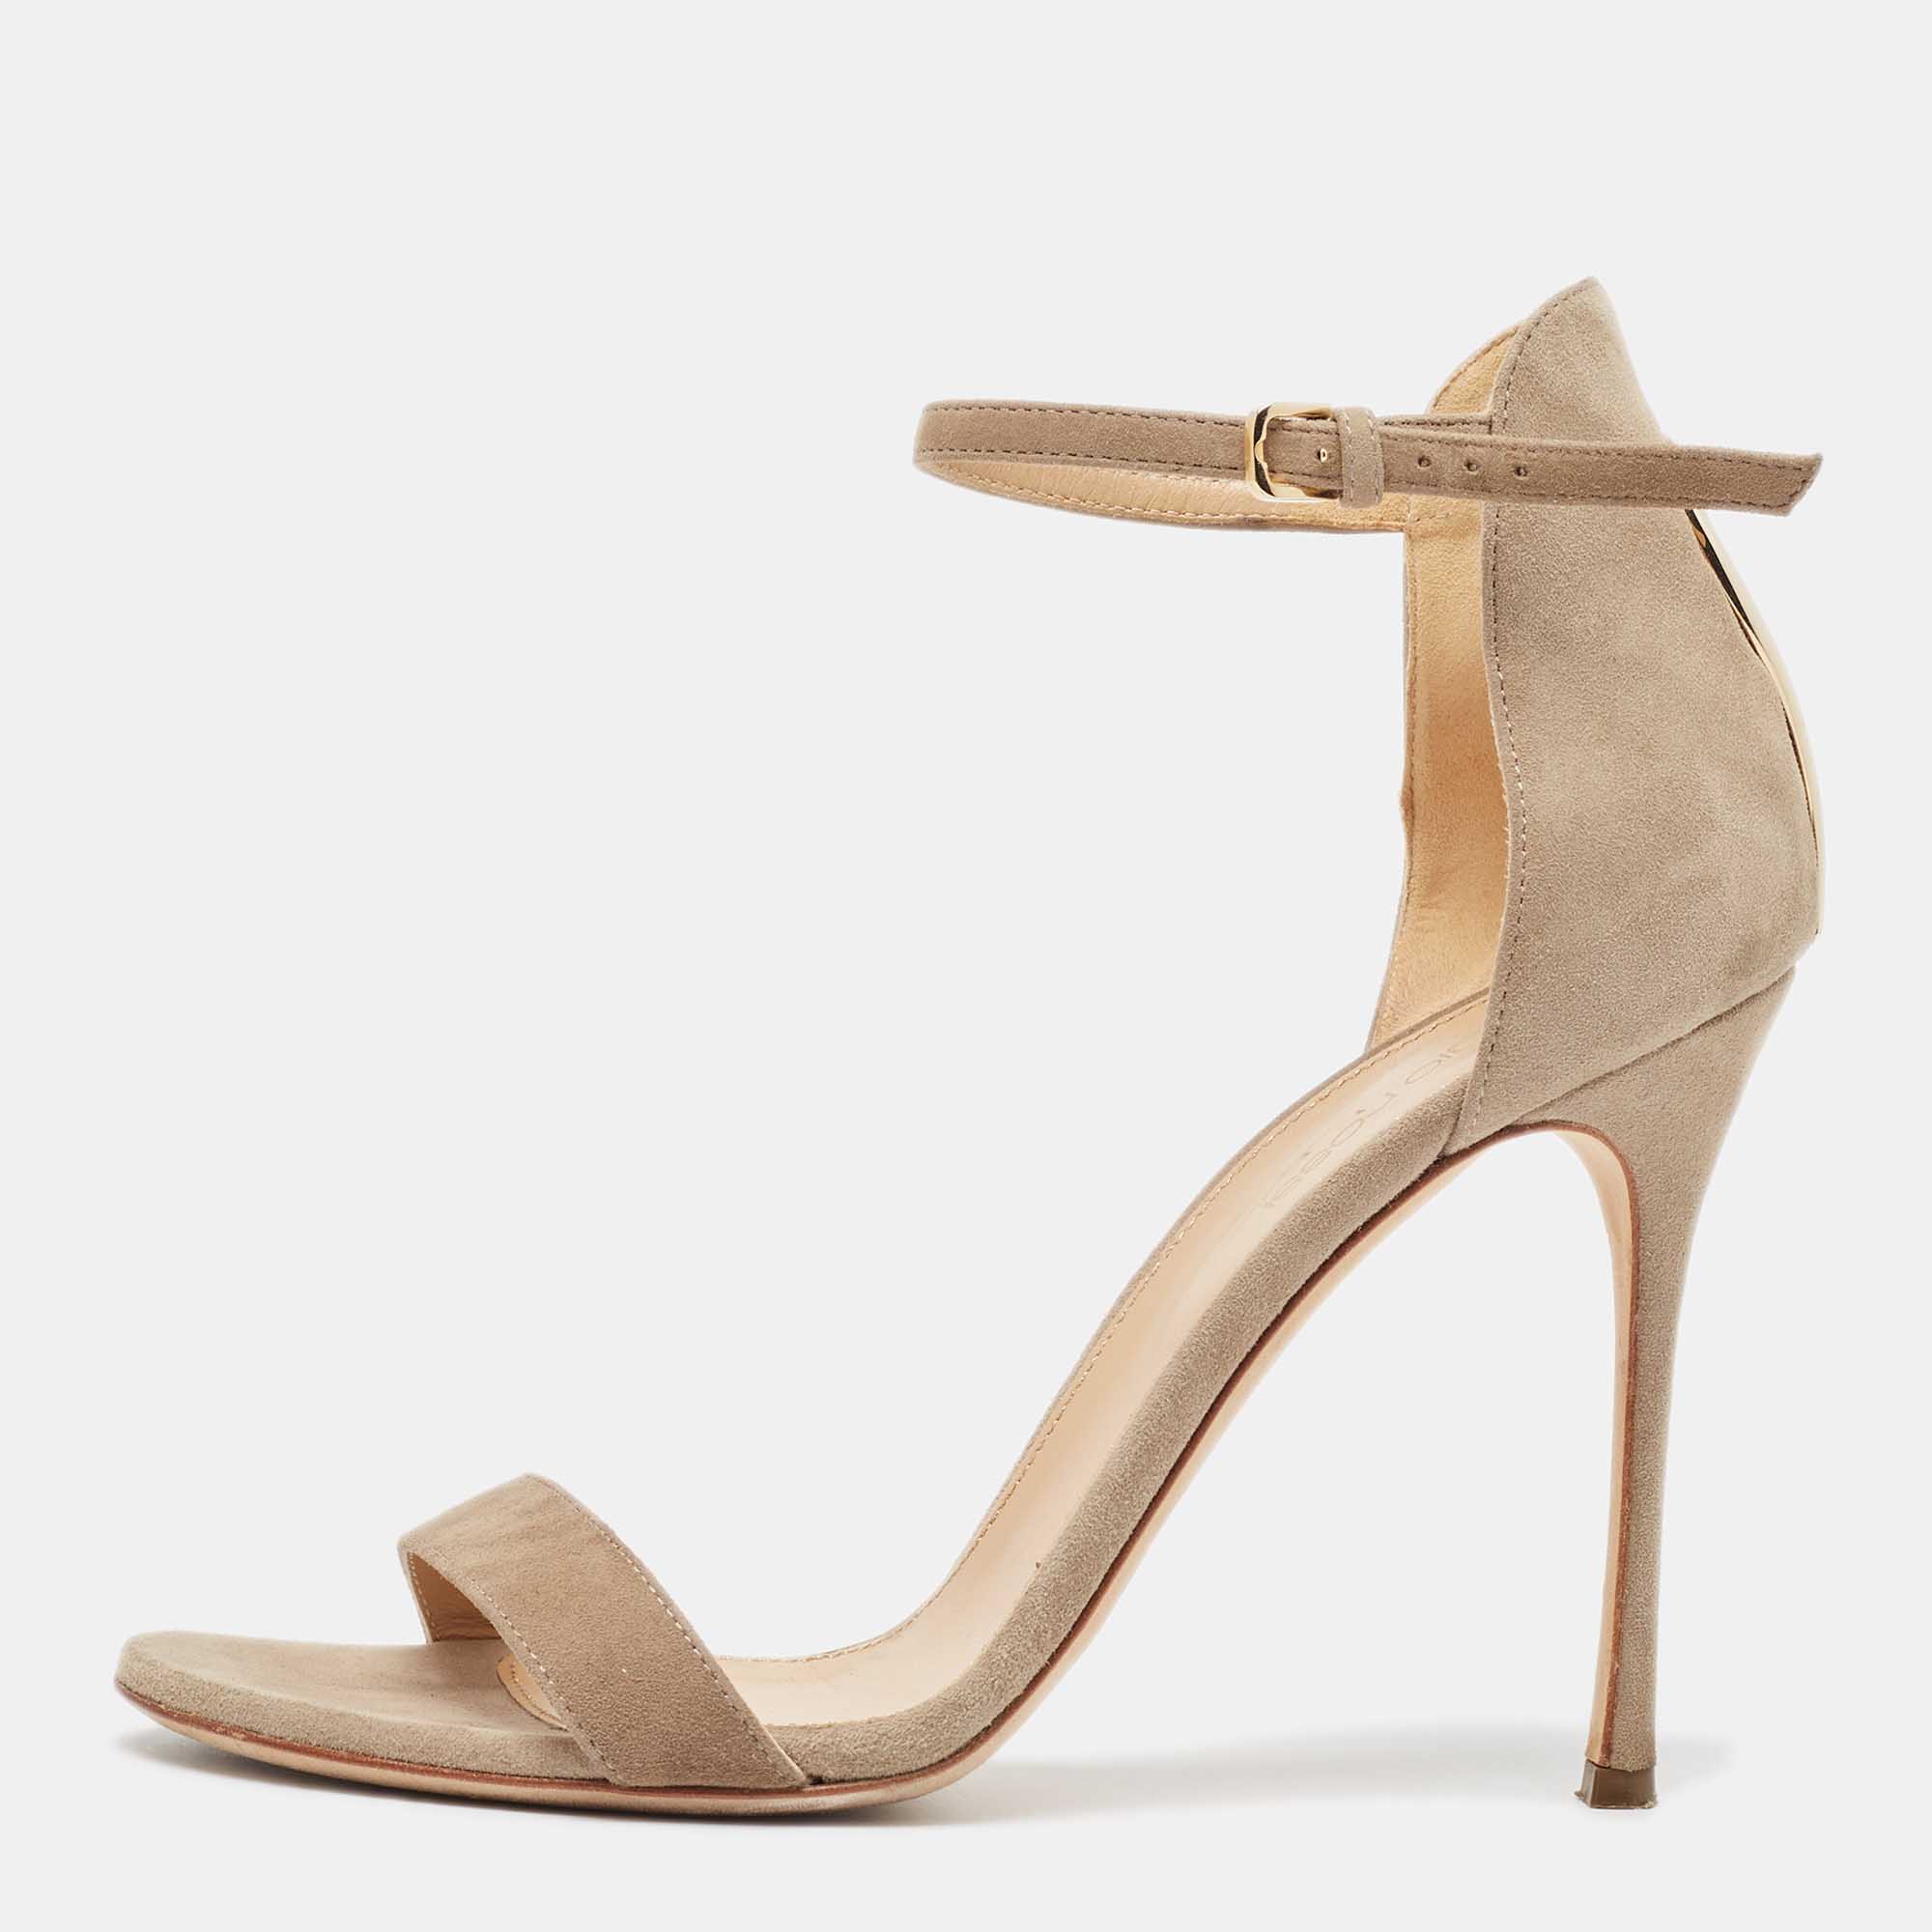 Sergio rossi beige suede ankle strap sandals size 37